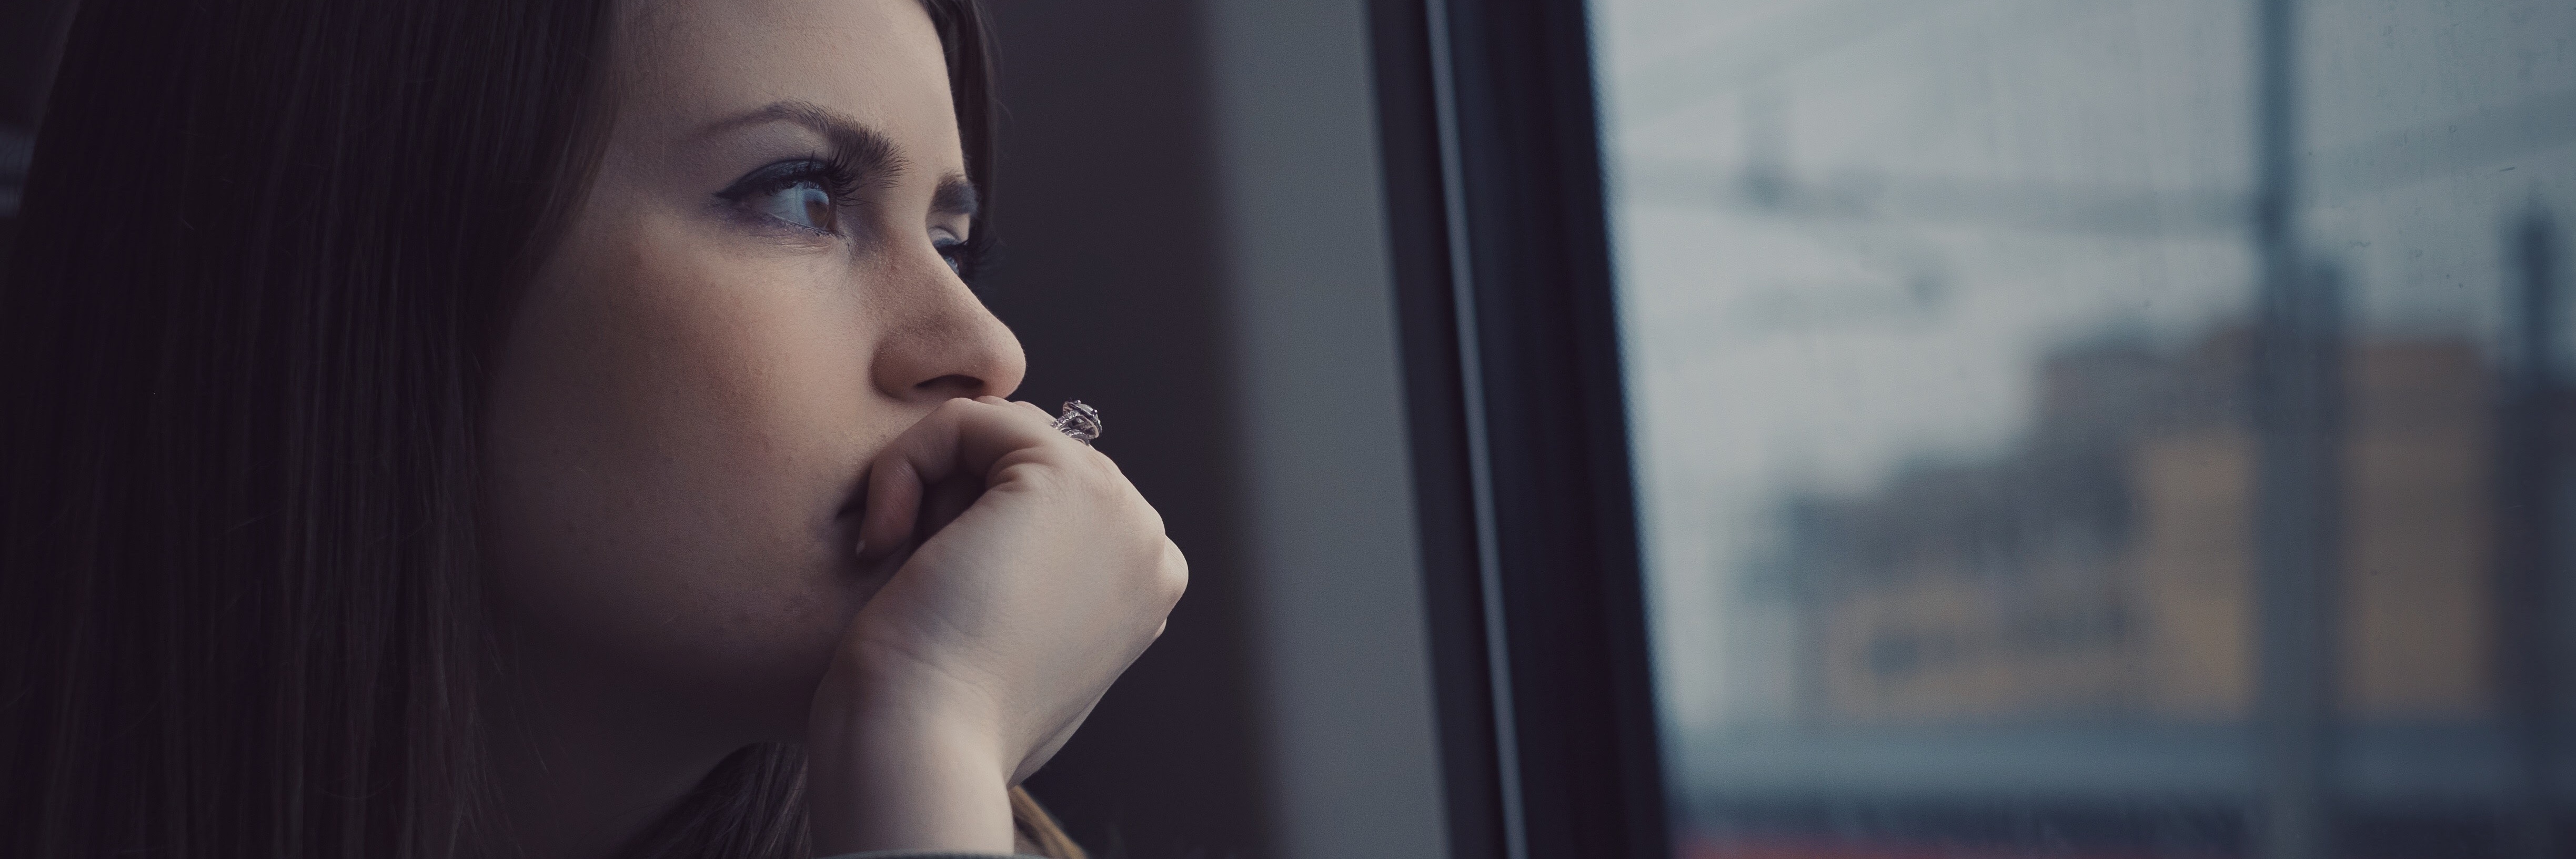 young woman staring out of public transport window looking pensive or anxious